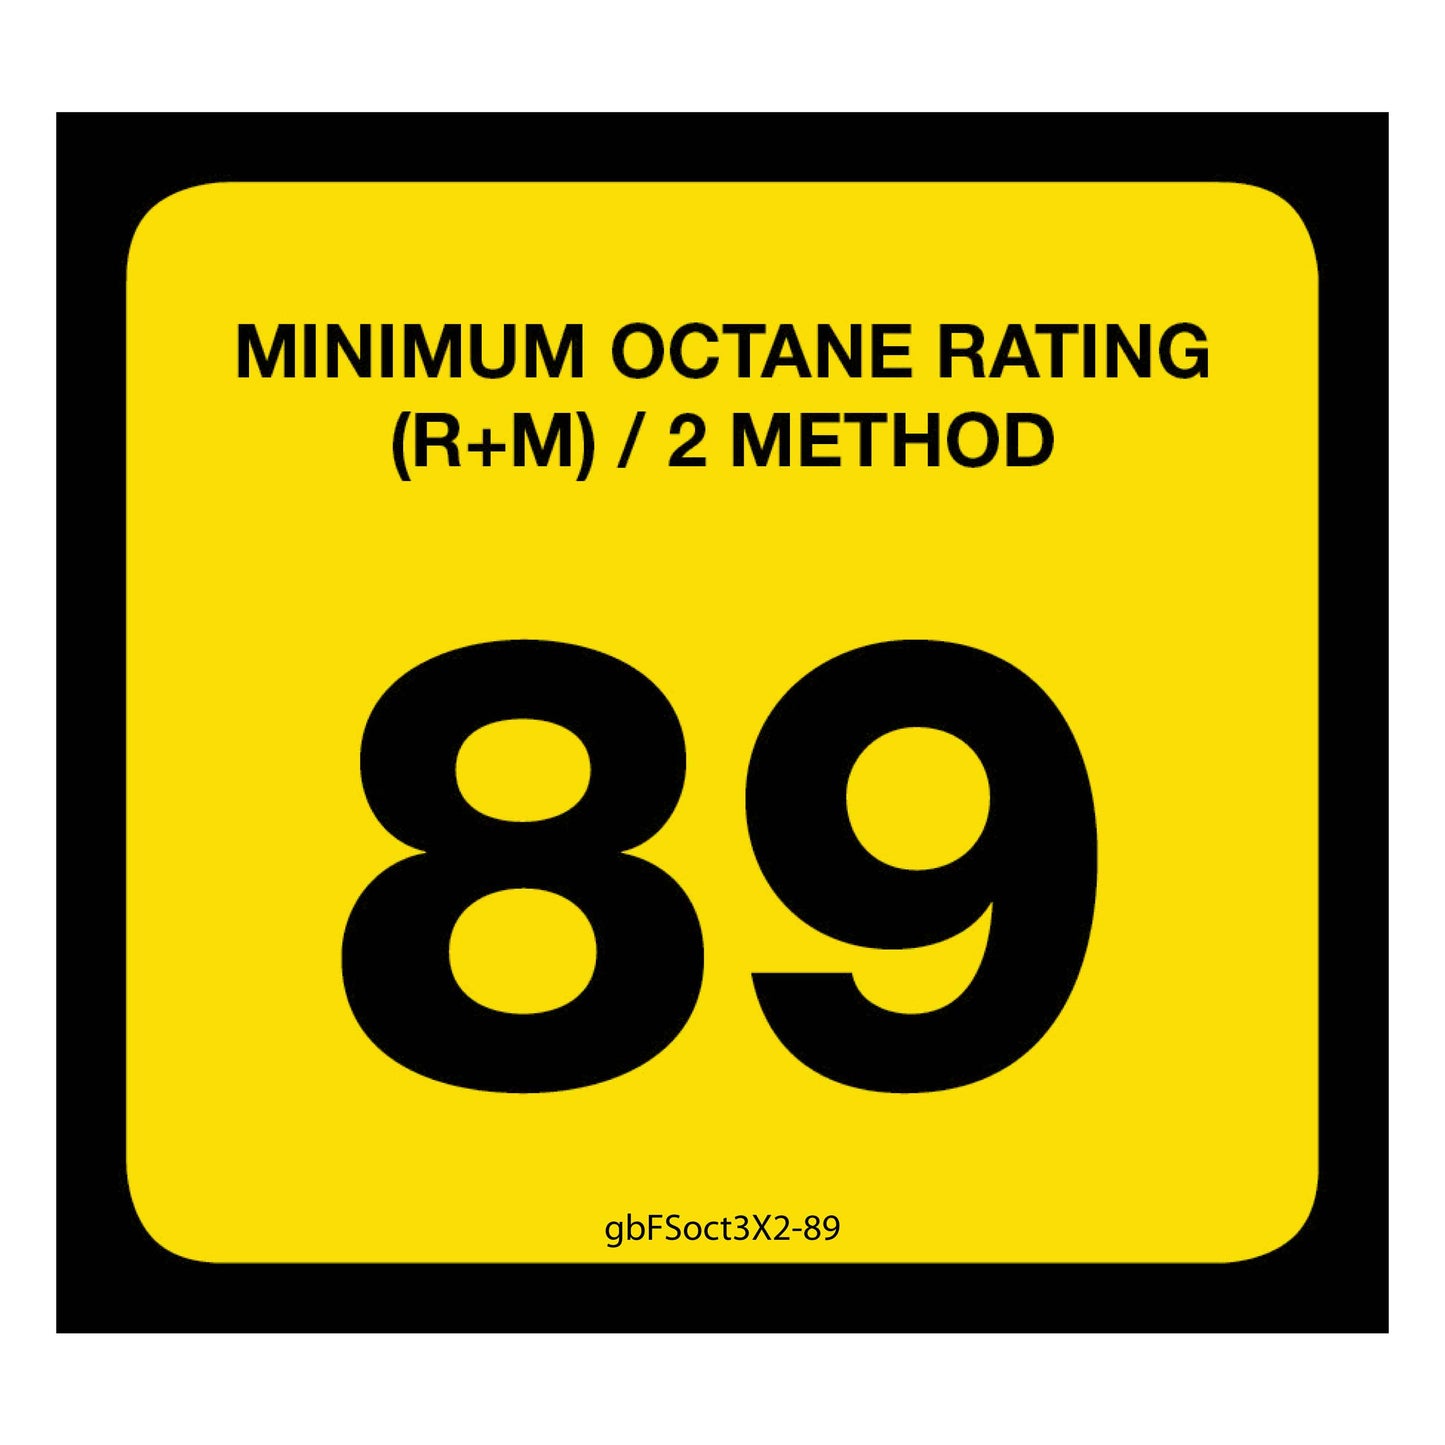 89 Octane Rating Decal. 3 inches by 2 inches in size. 